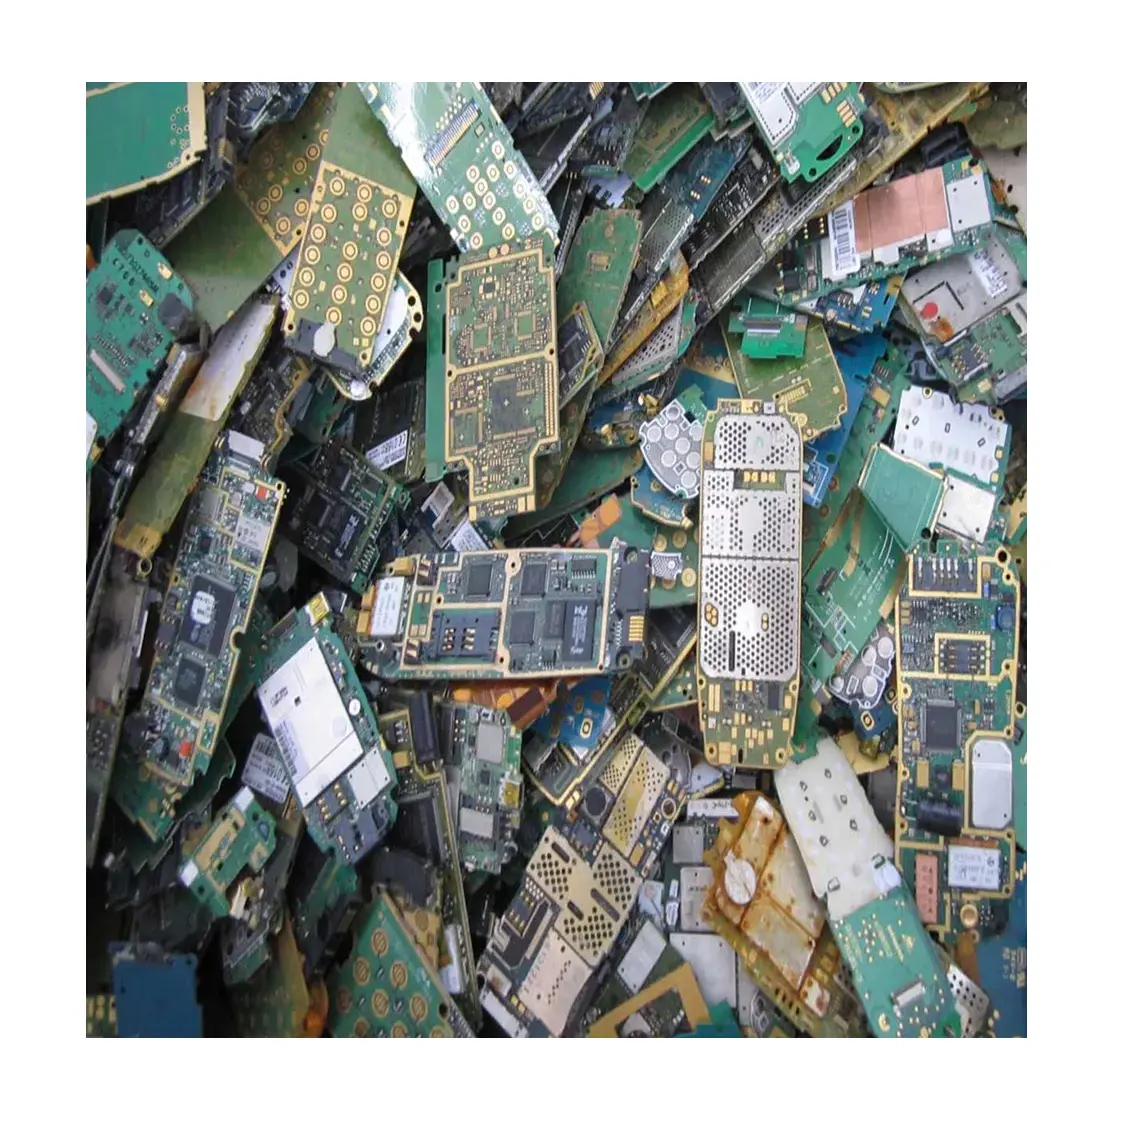 Old Mobile phone scrap and Cell phone scrap for sale